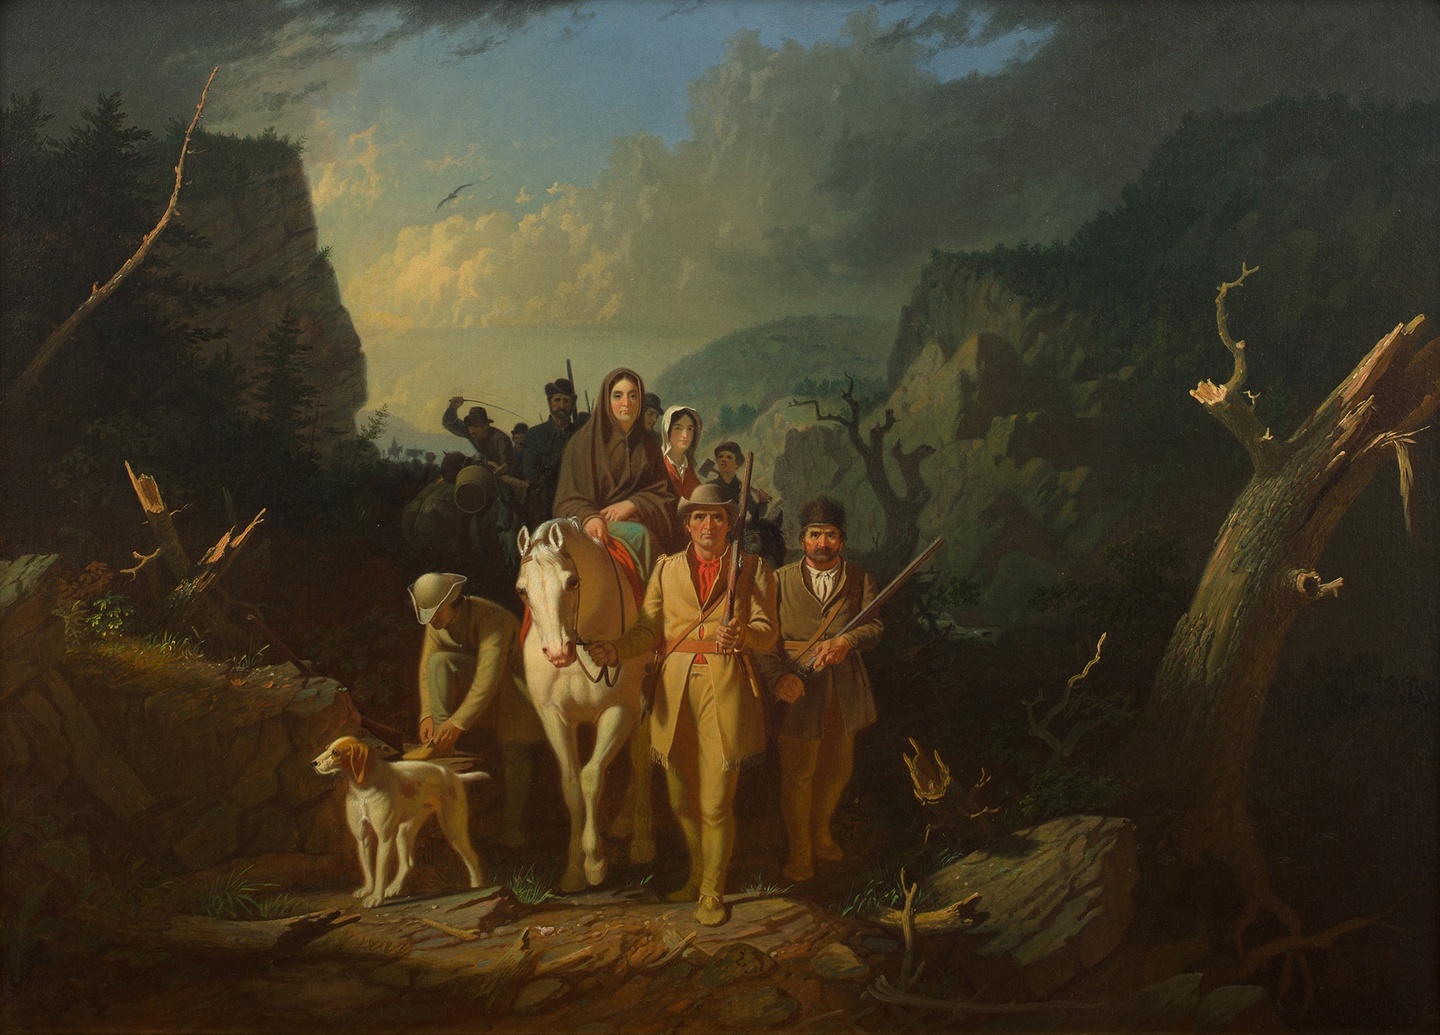 A group of people, some on horseback, walking through a mountain pass